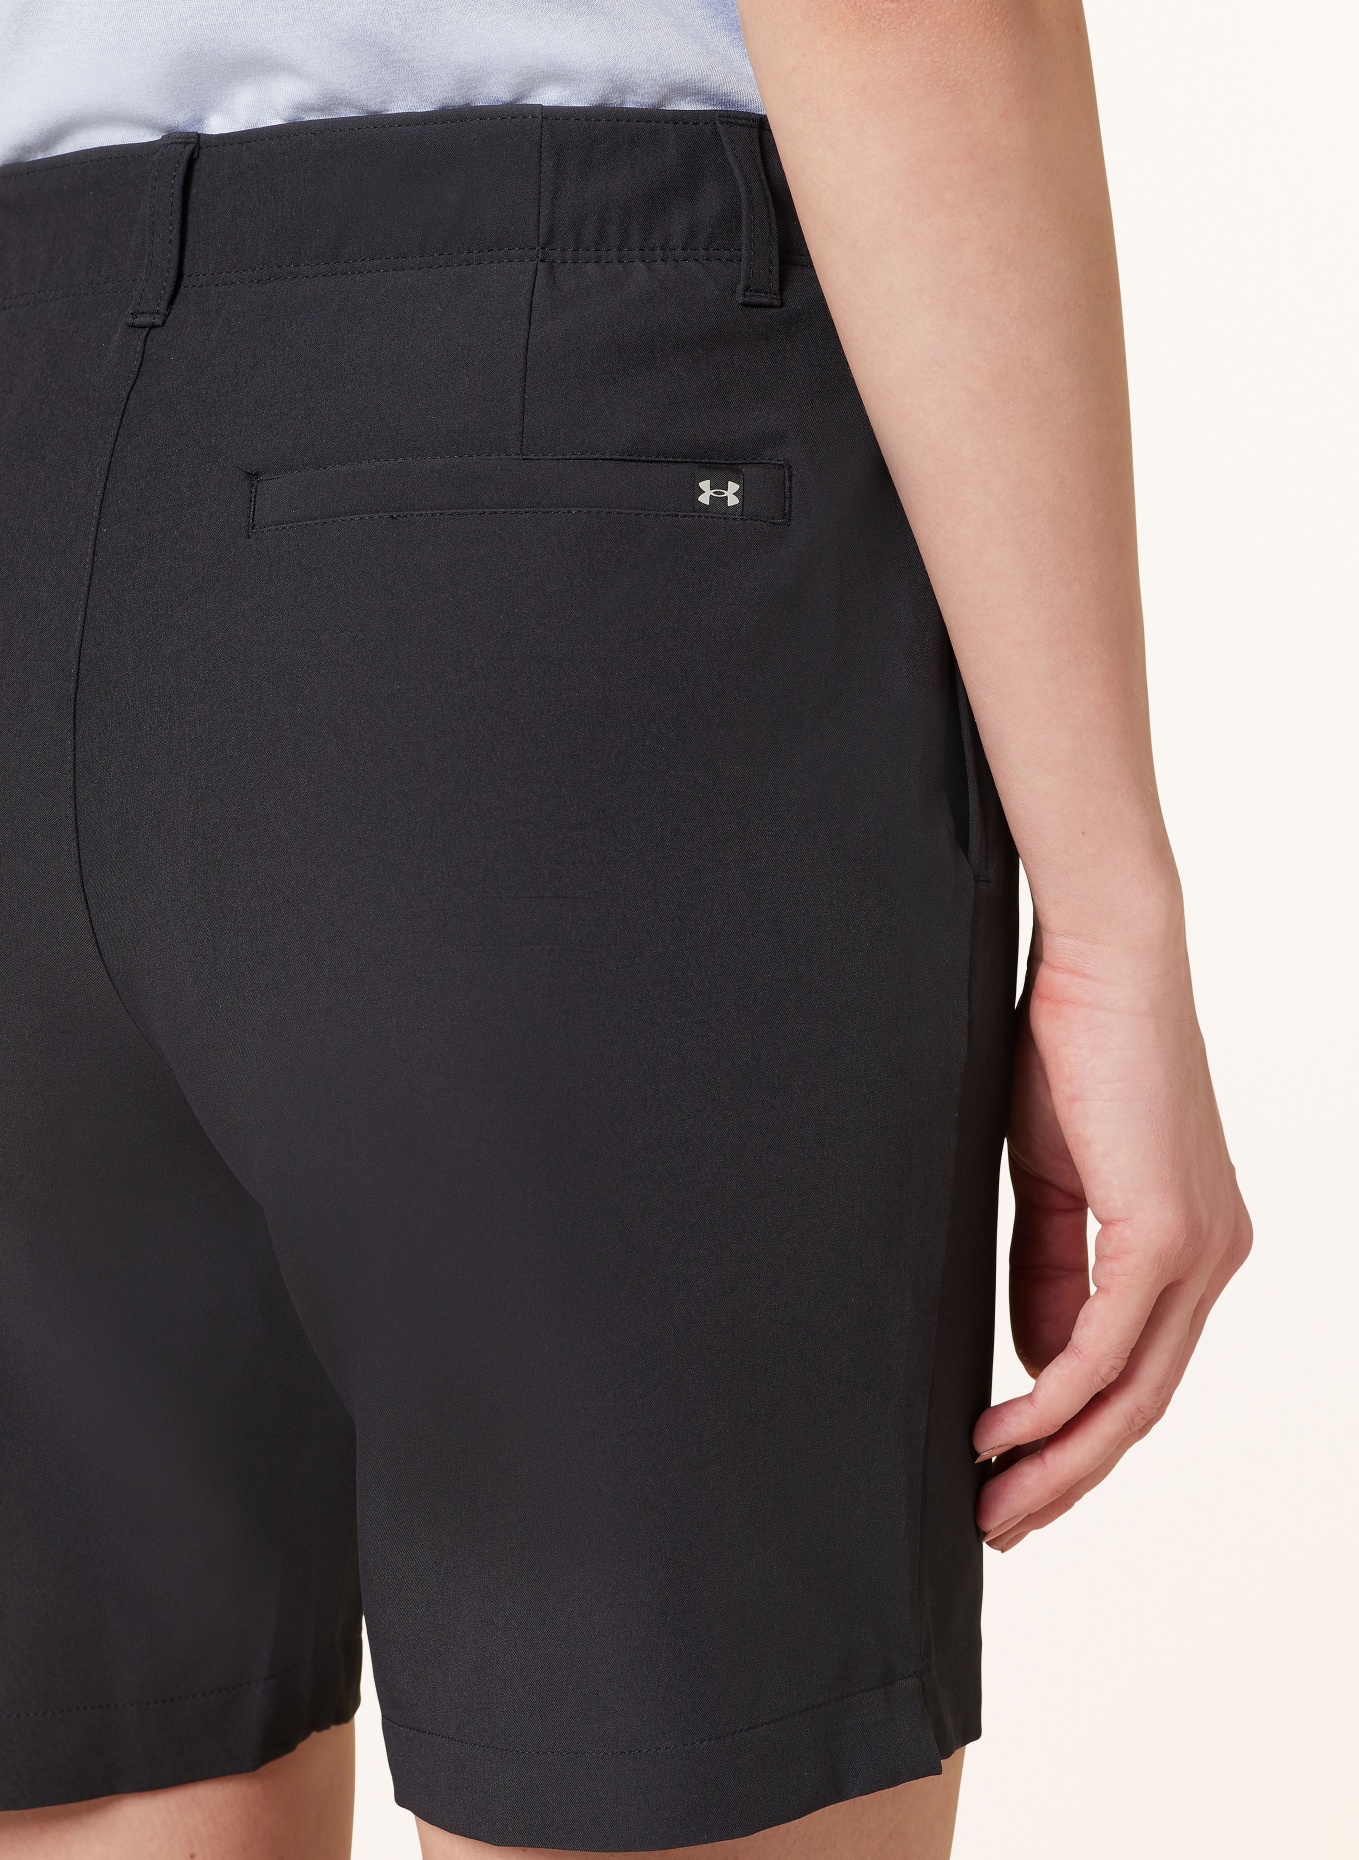 UNDER ARMOUR Golf shorts UA DRIVE 7 in black